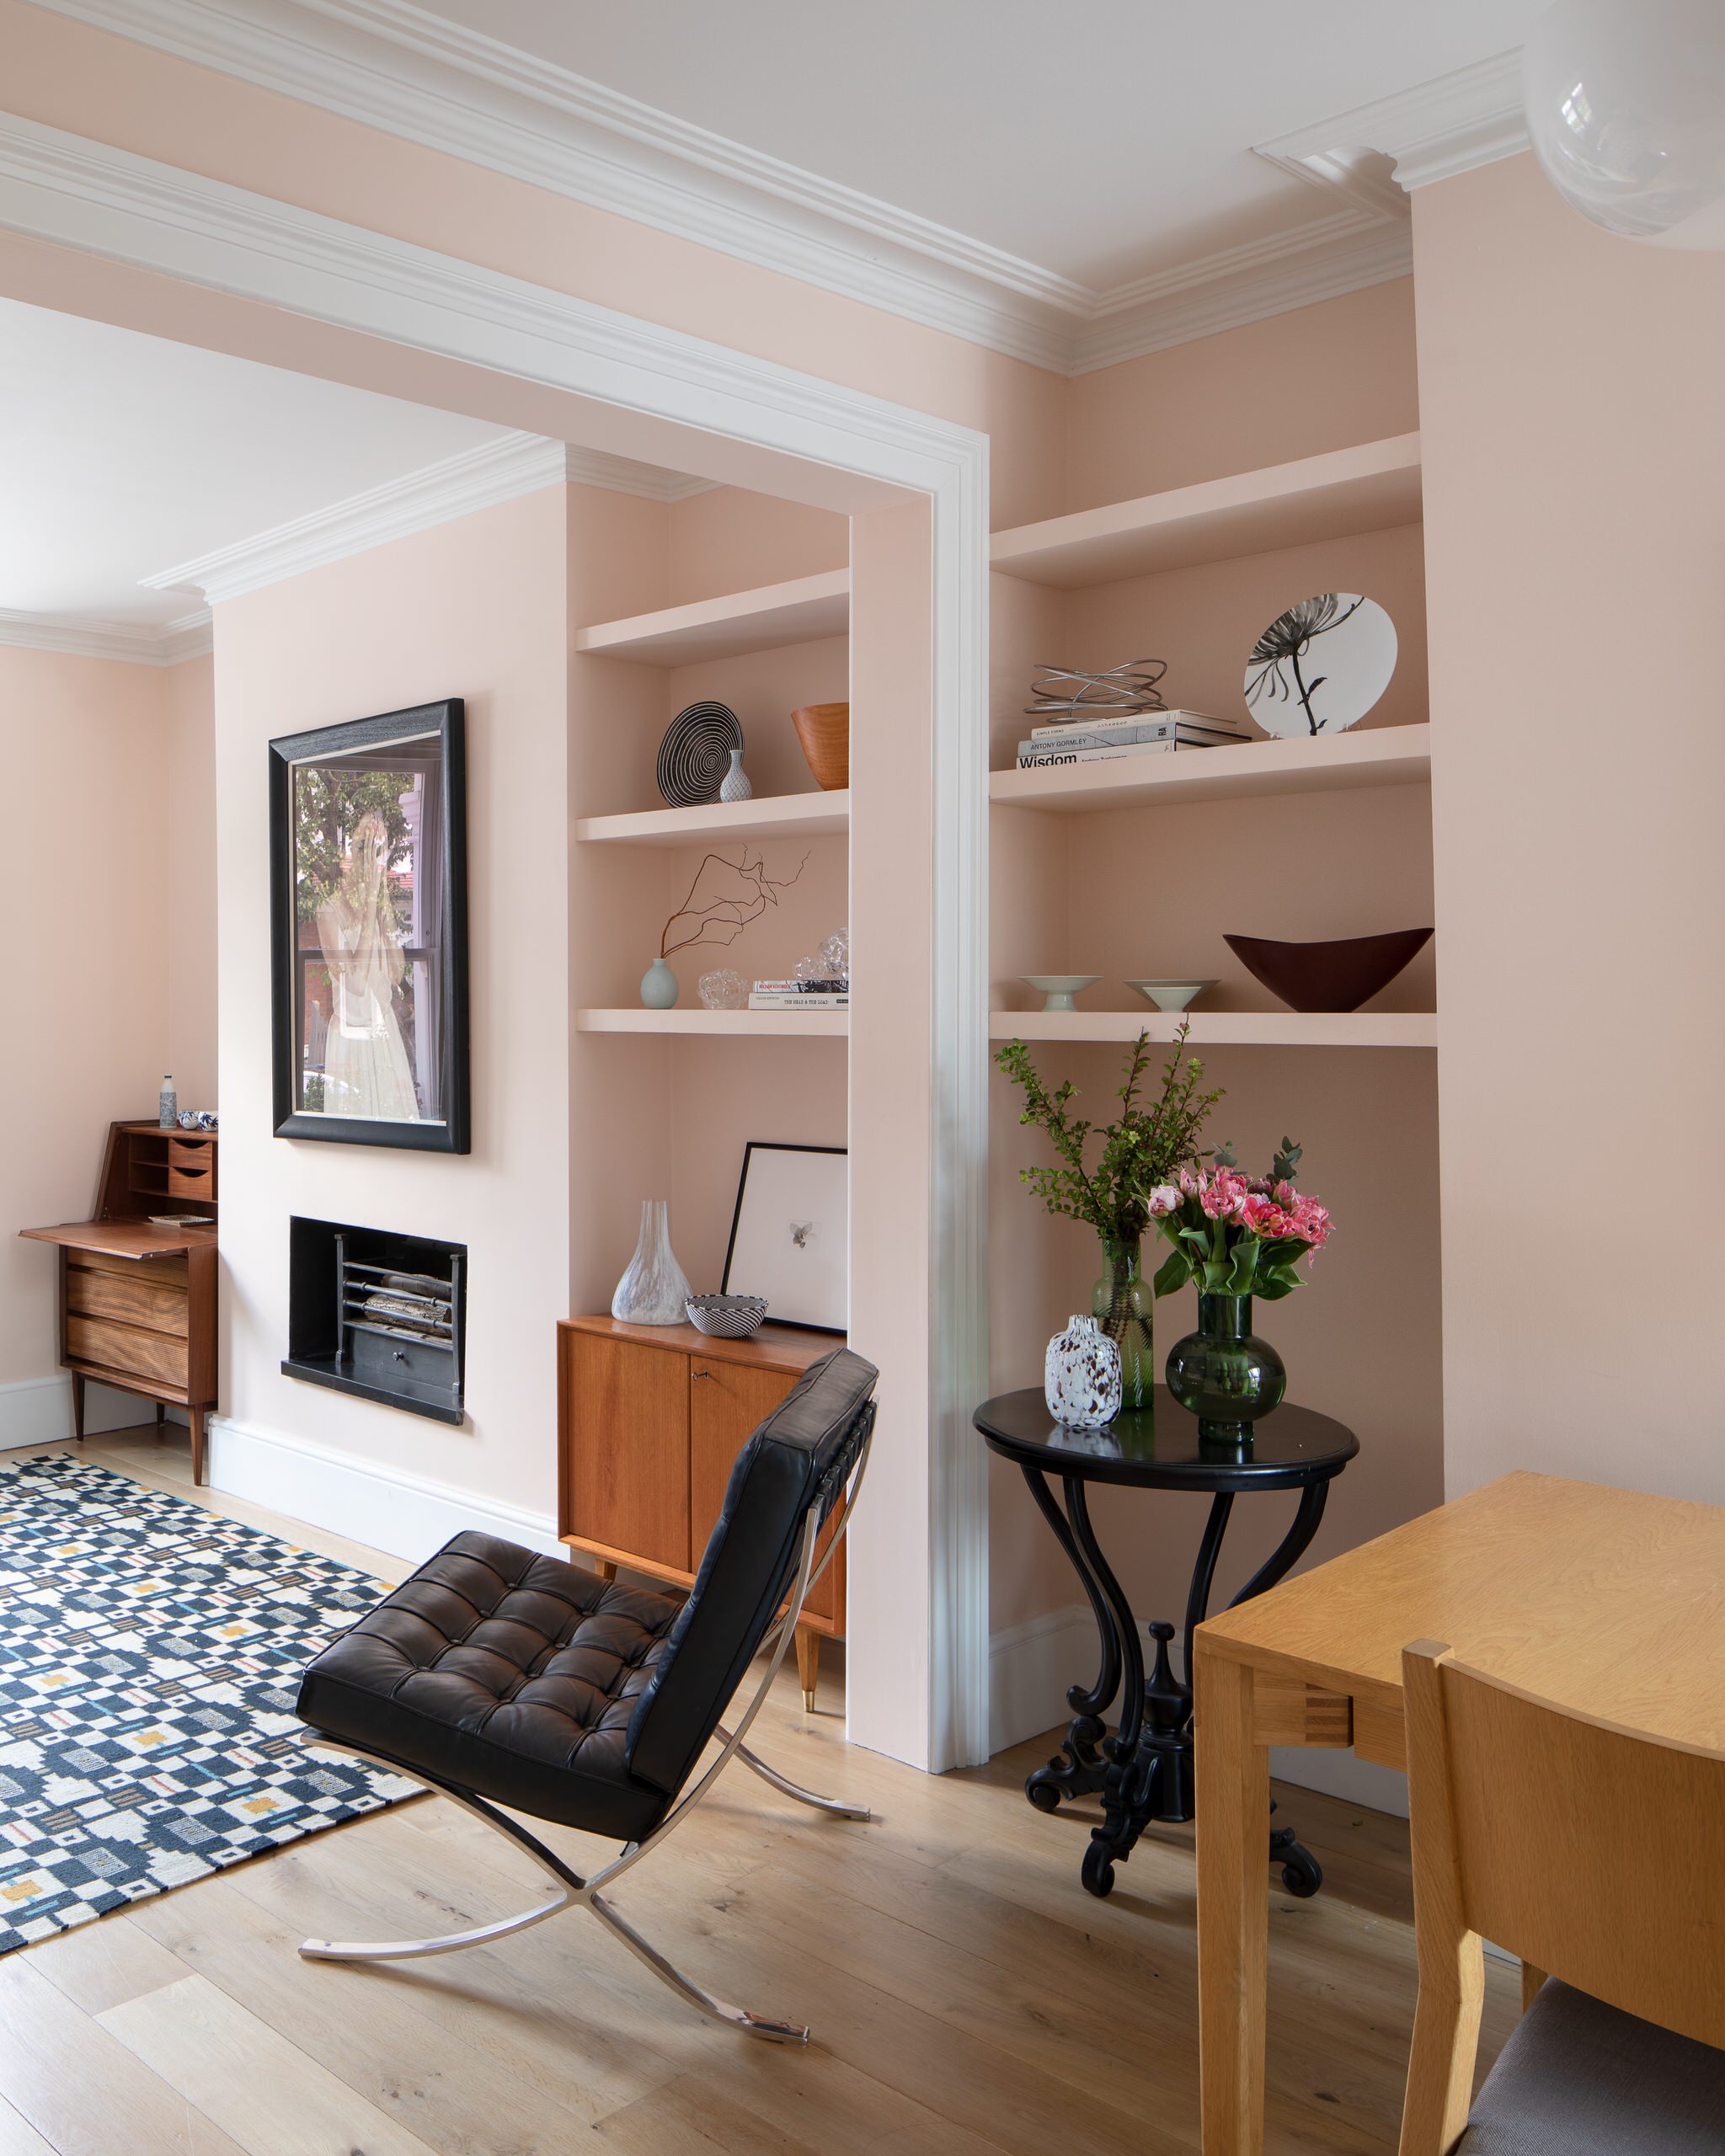 Edwardian Family Home – East Finchley